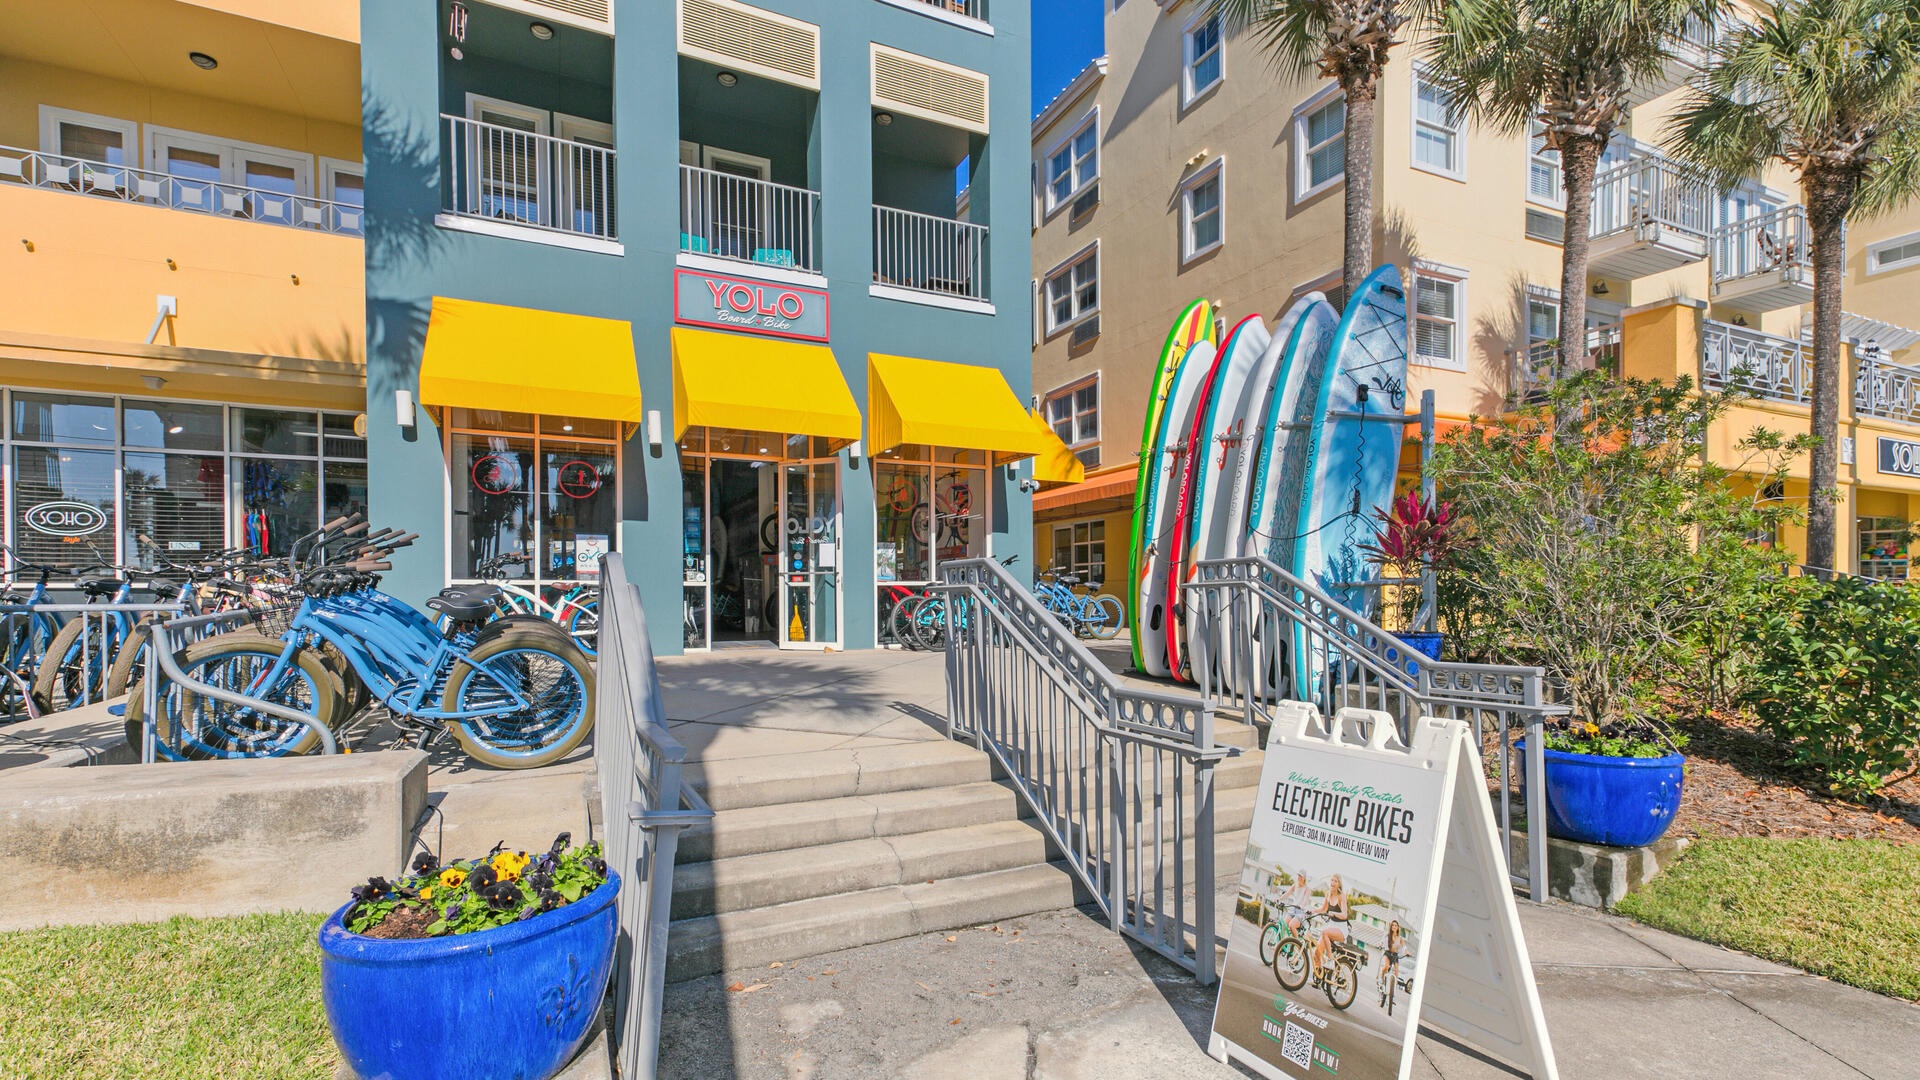 Shopping, dining and activities at nearby Gulf Place!